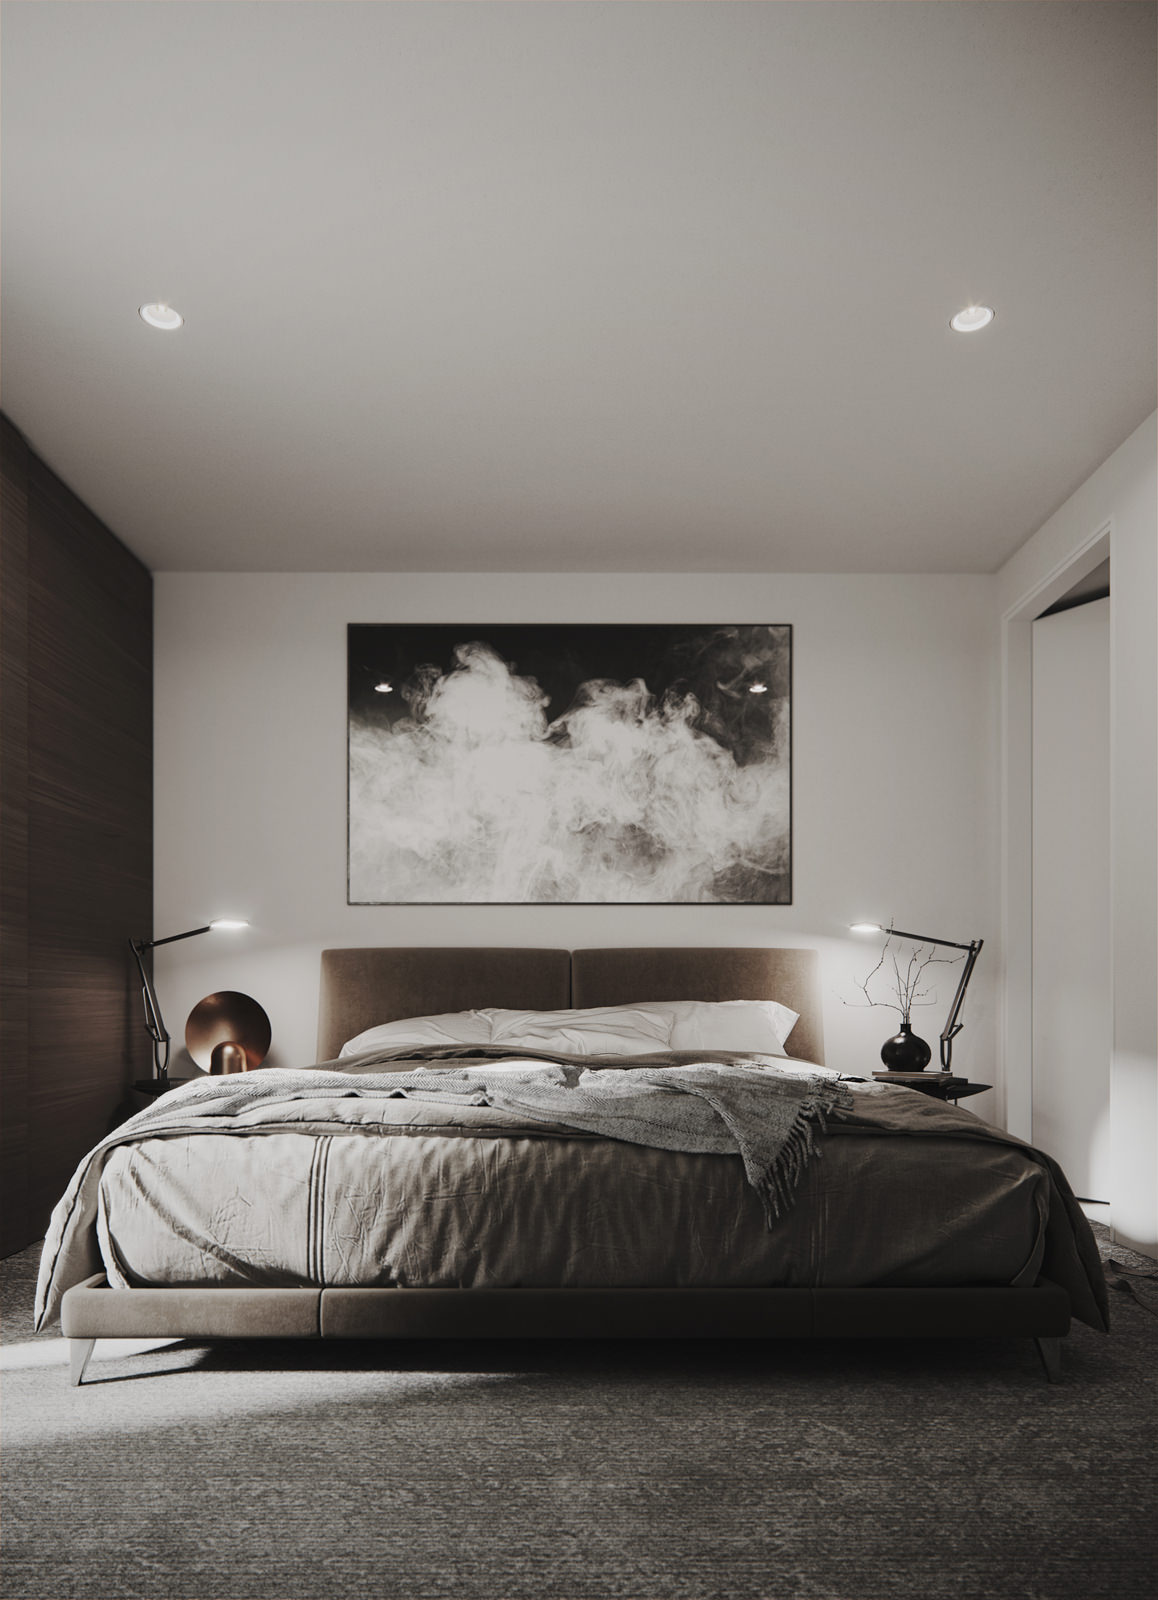 Interior 3D render of a bedroom in full detail: gray herringbone plaid blanket on a bed, hidden storage space behind wooden paneling, convenient adjustable stainless steel bedside lamps on petite designer tables, with the whole space being filled with both artificial and natural light